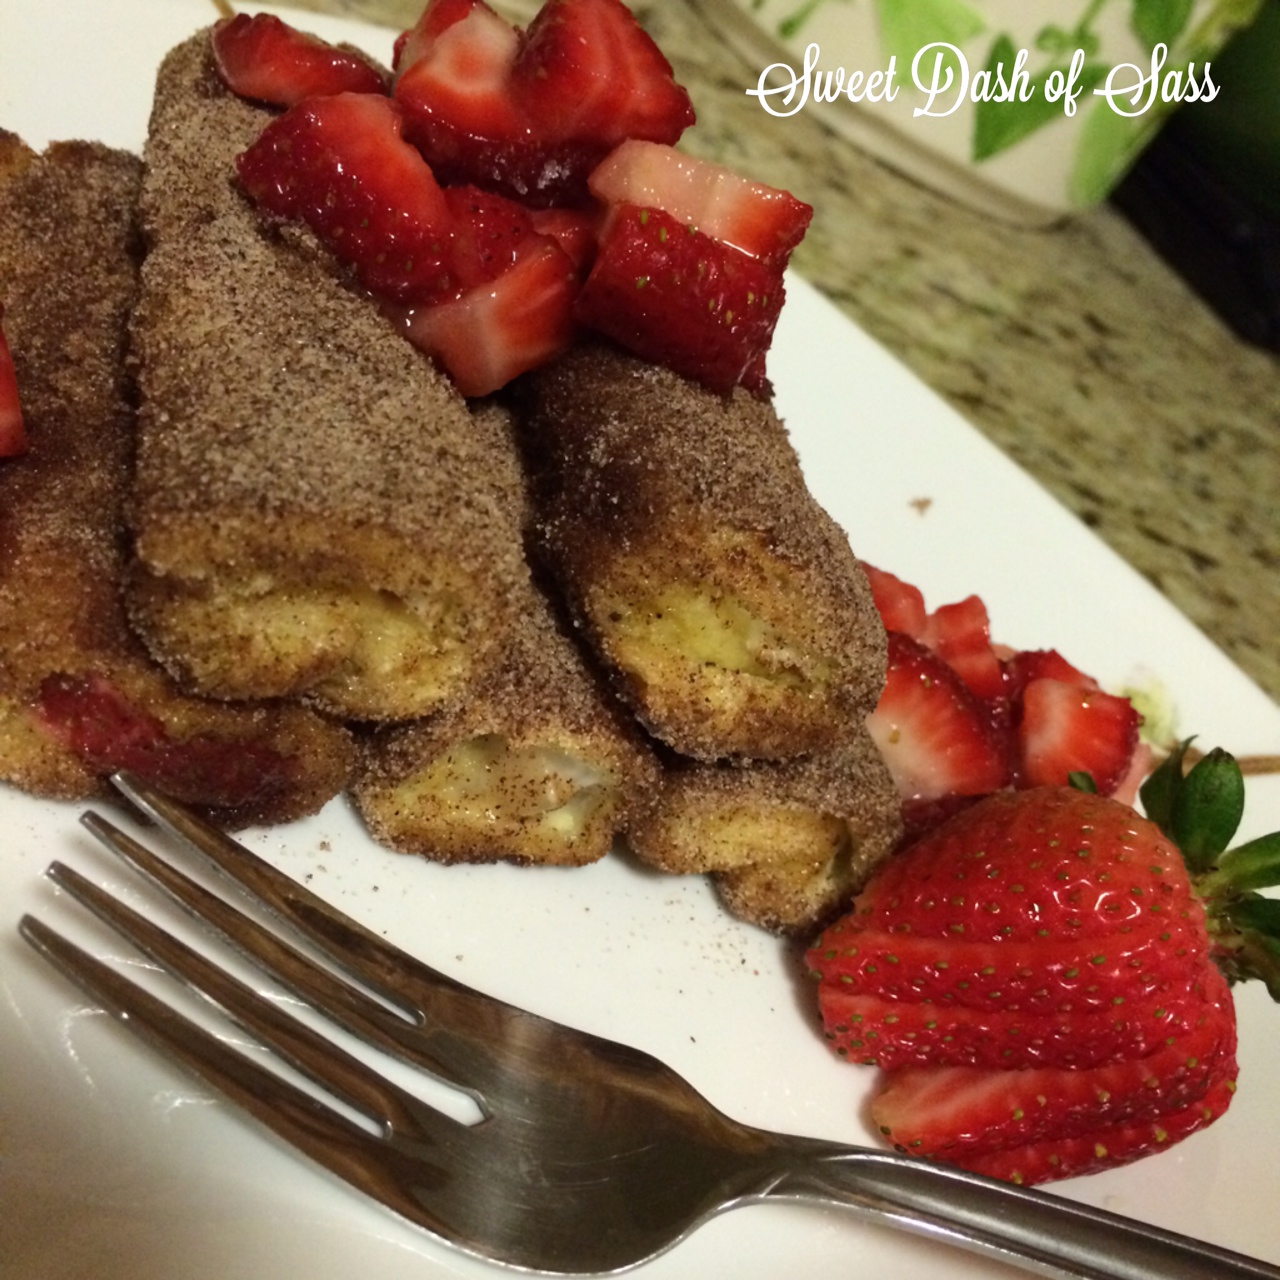 Strawberry Cinnamon French Toast Roll-ups - www.SweetDashofSass.com - so easy and delicious - will definitely make again!